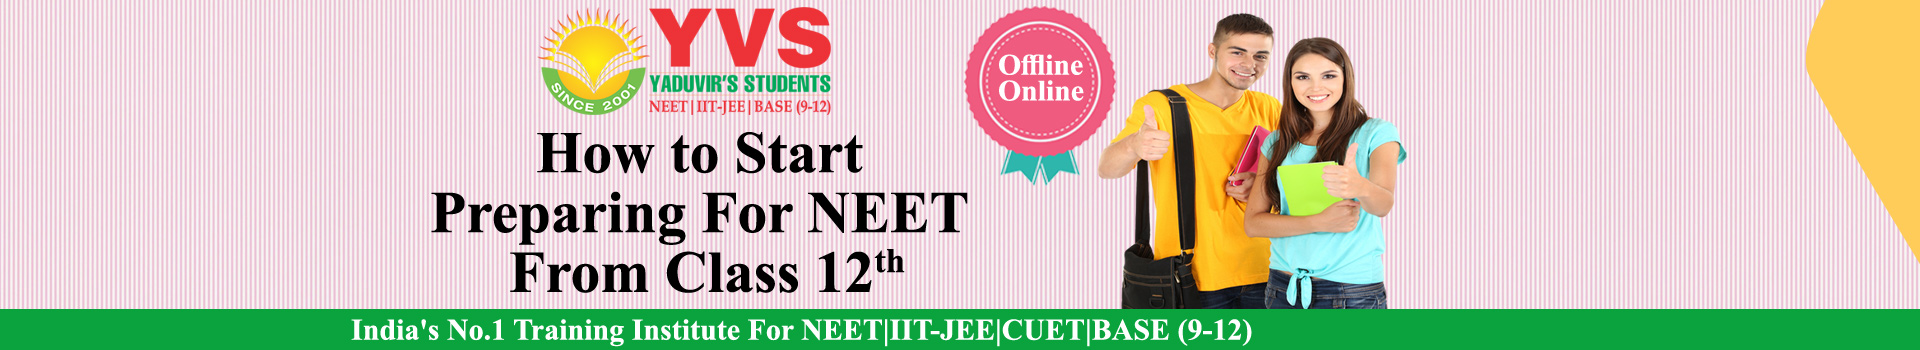 HOW TO START PREPARING FOR NEET FROM CLASS 12